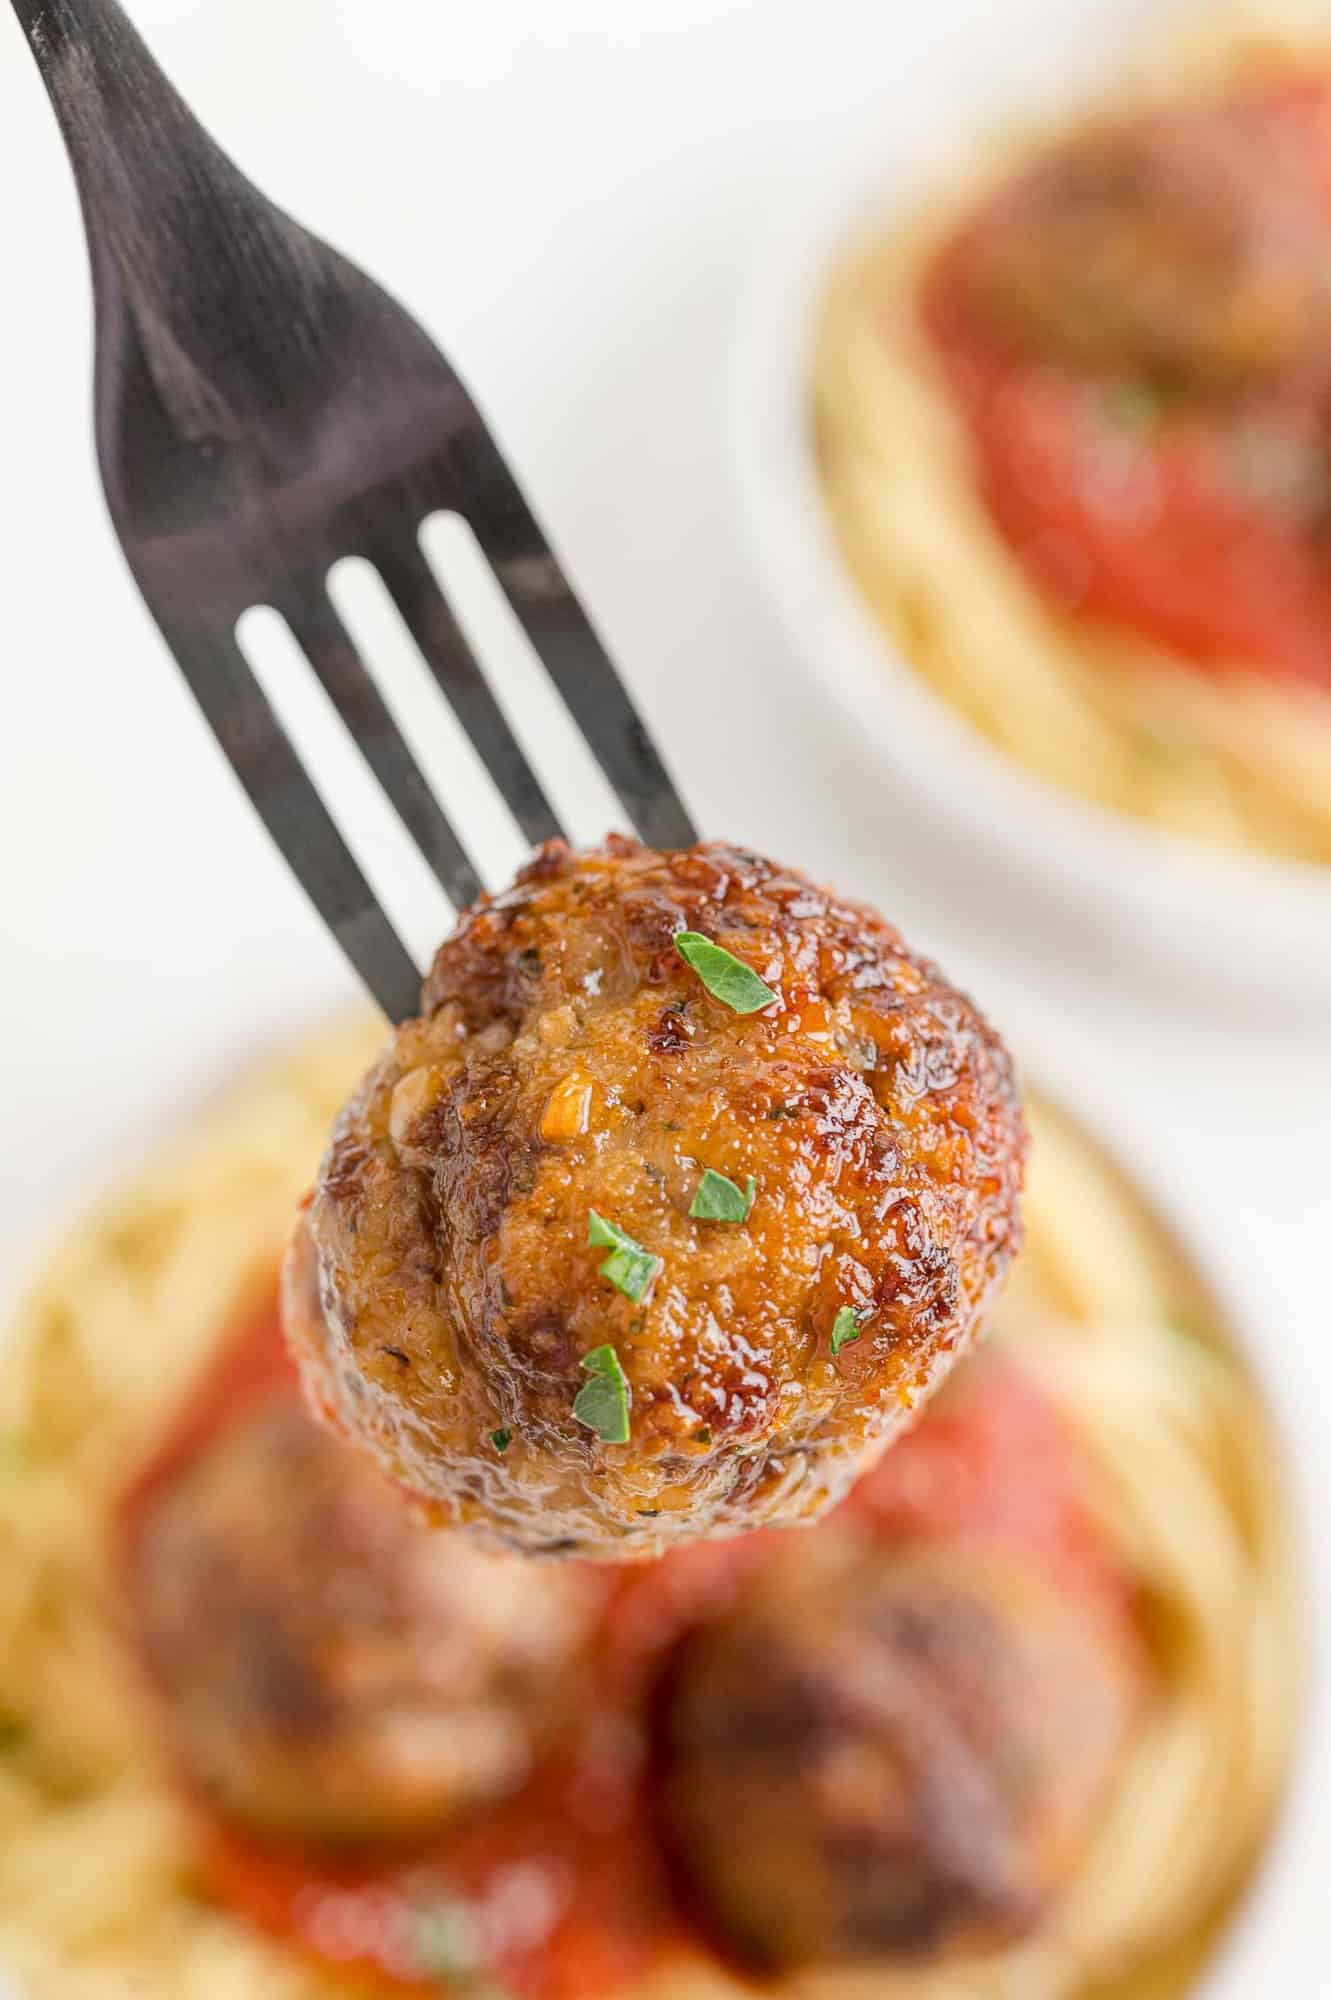 Perfectly browned meatball on a fork.